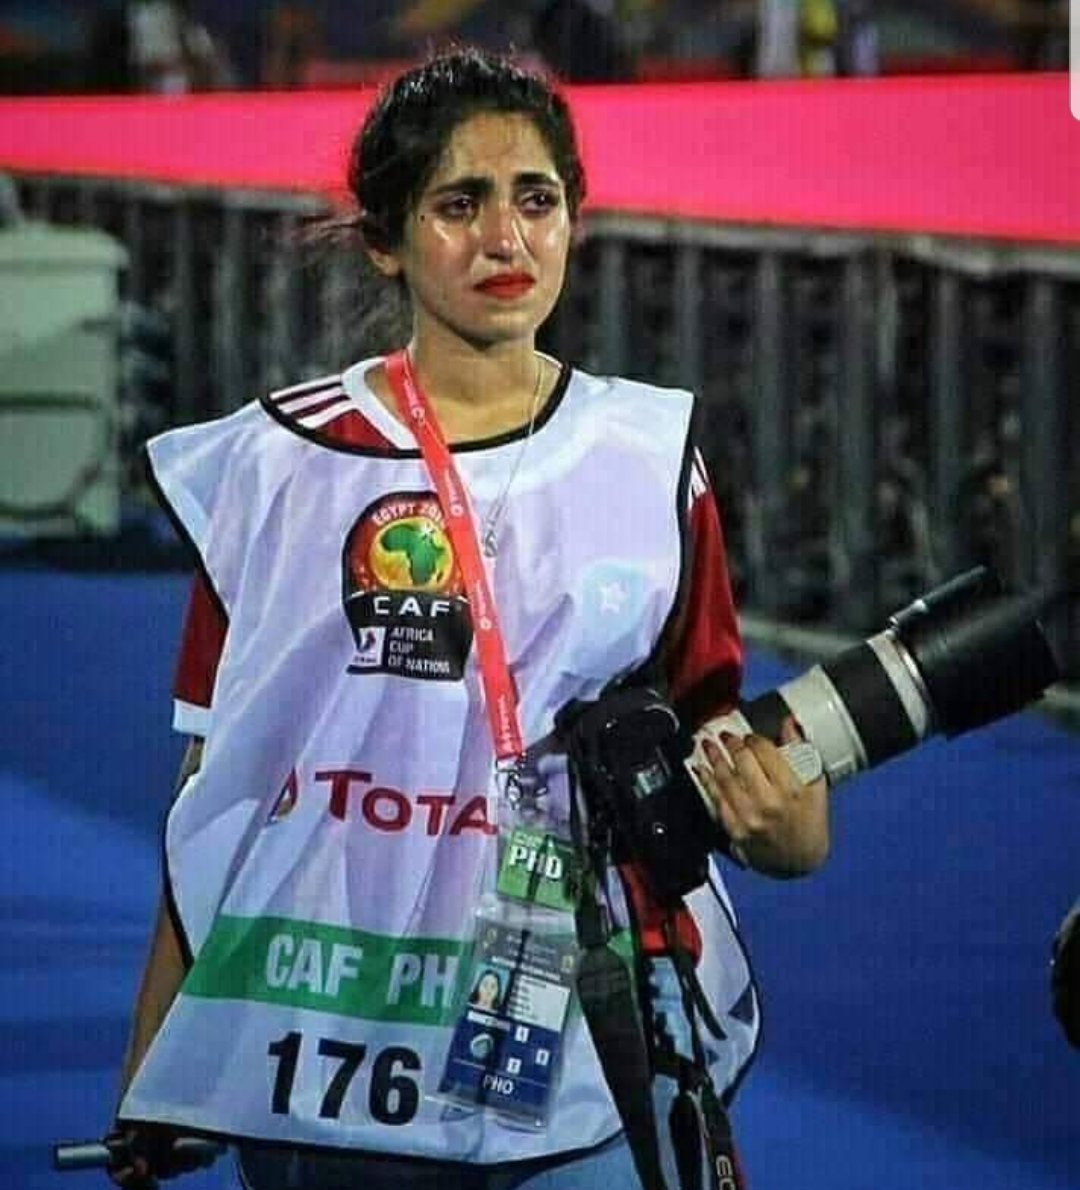 The Morrocan photographer who broke down in tears following her team's exit.

Hope I don't cry this evening, too😂